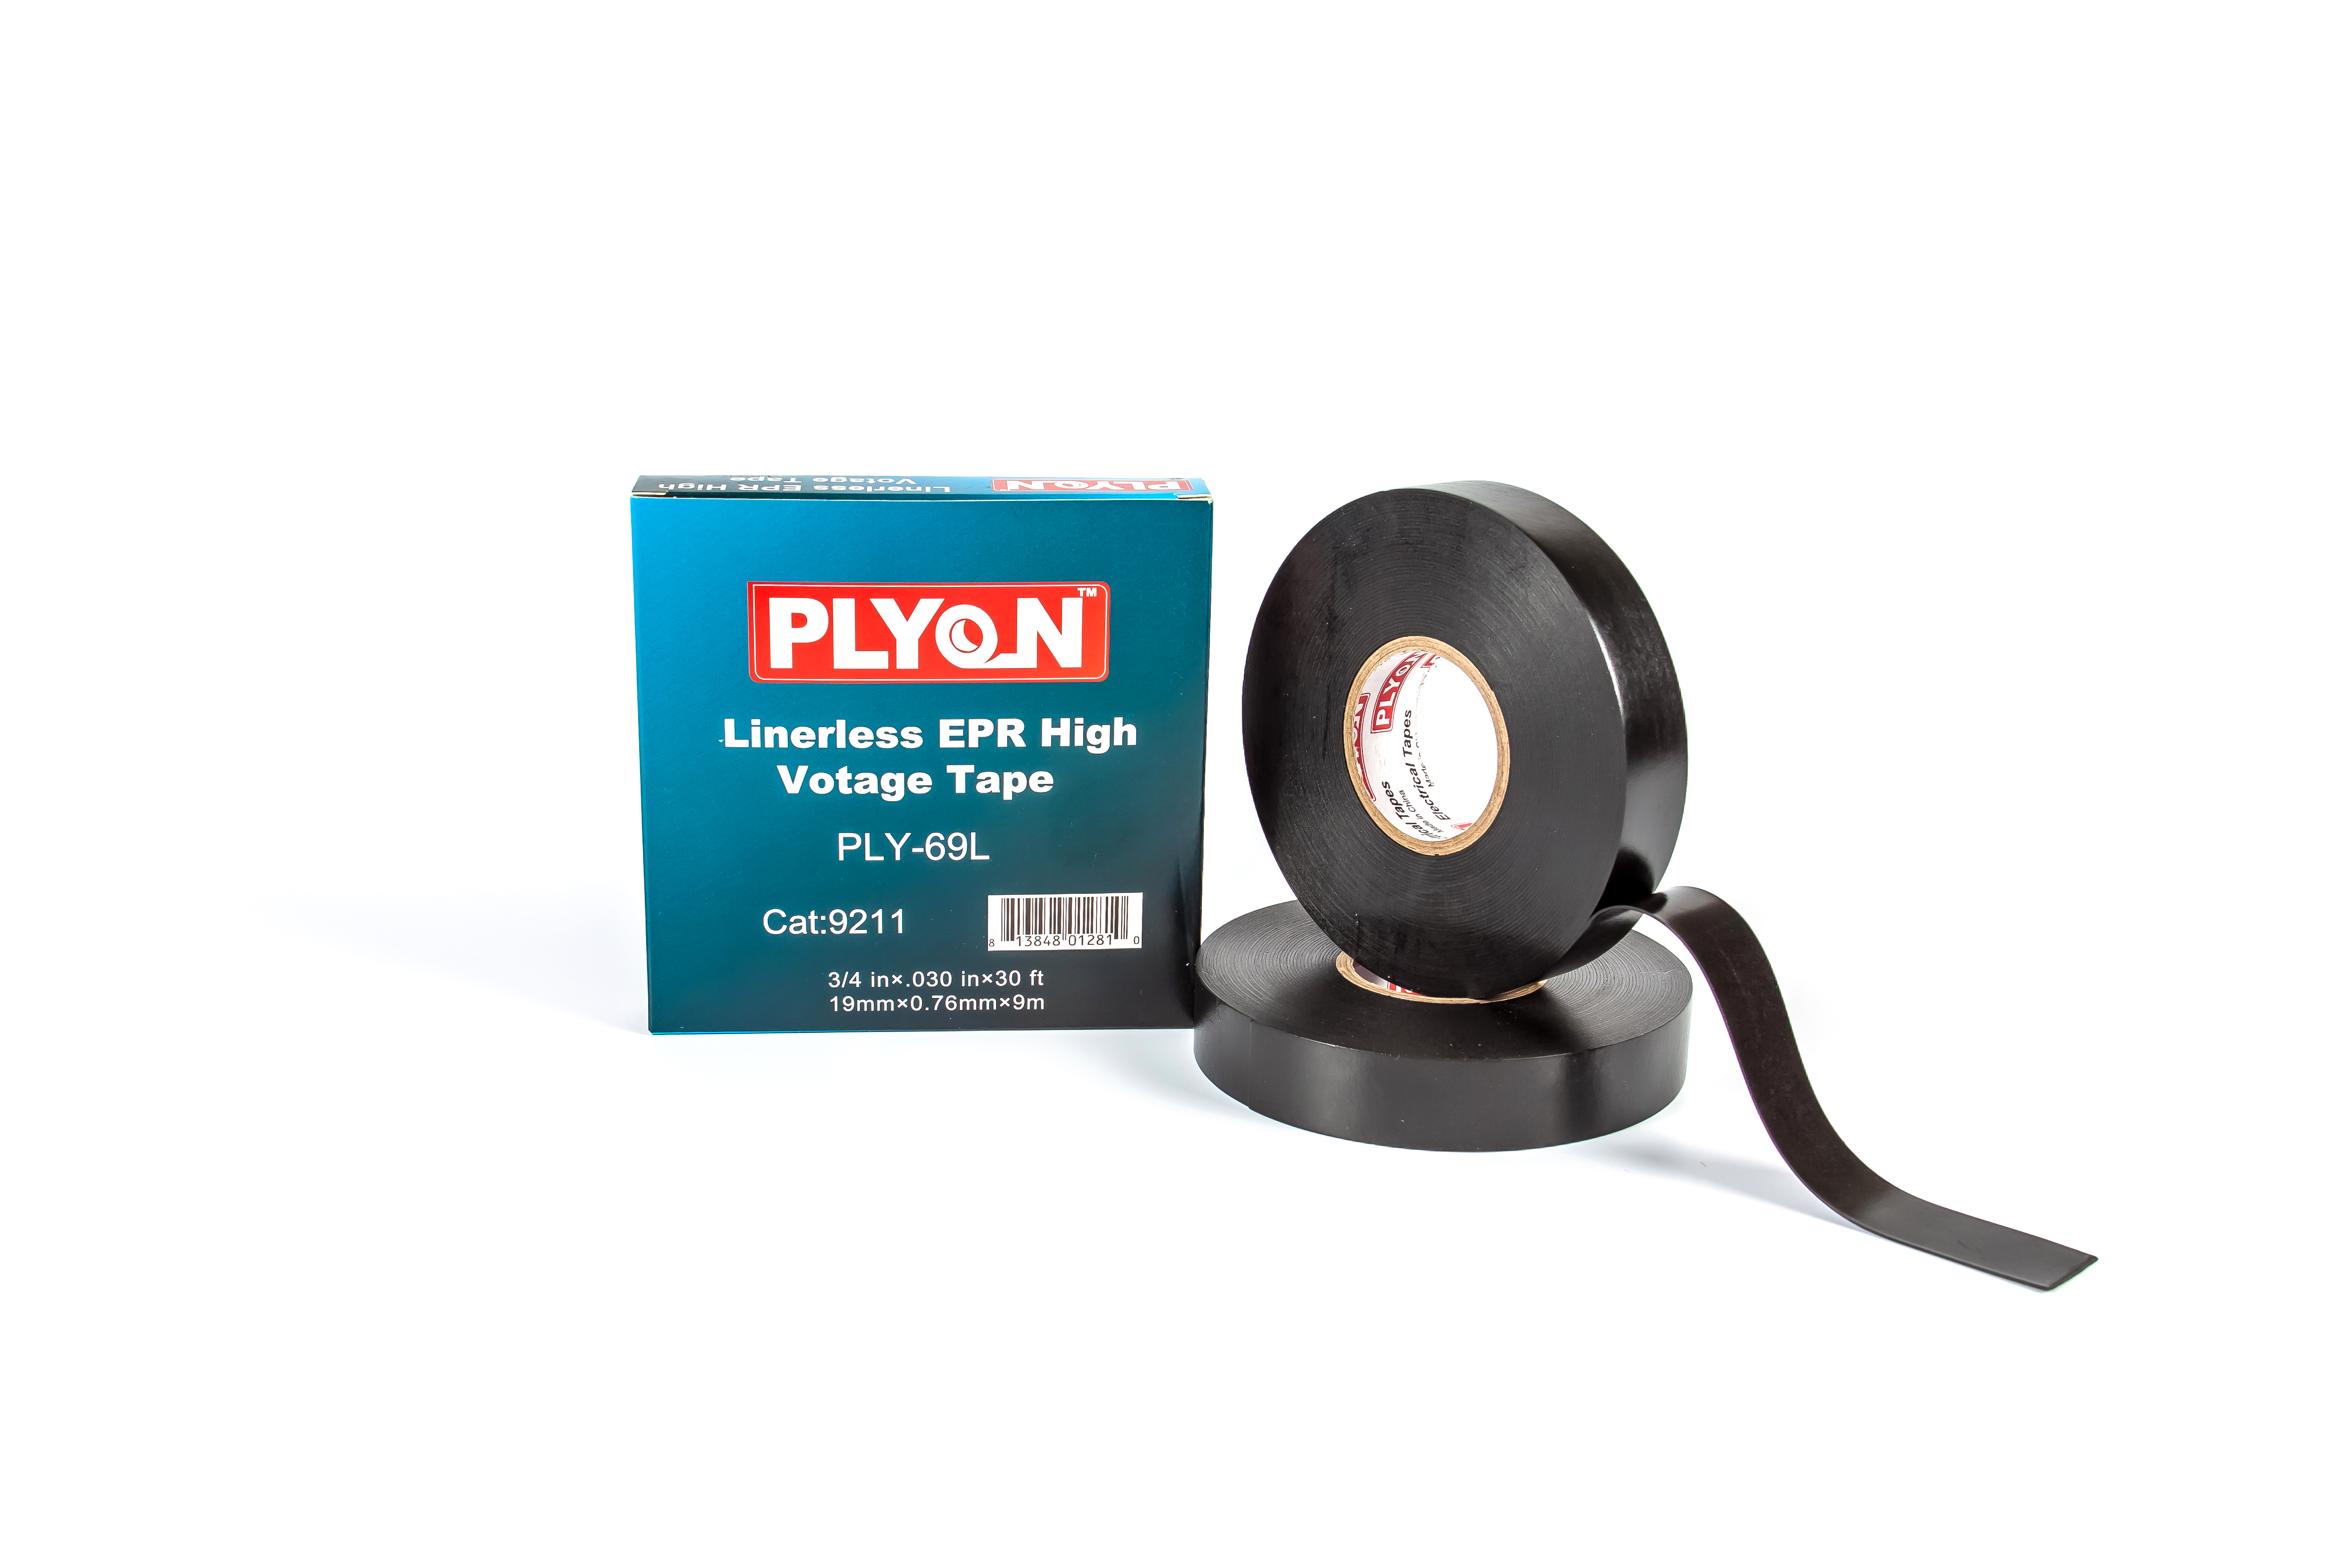 ply-69L lineriess EPR high voltage tape